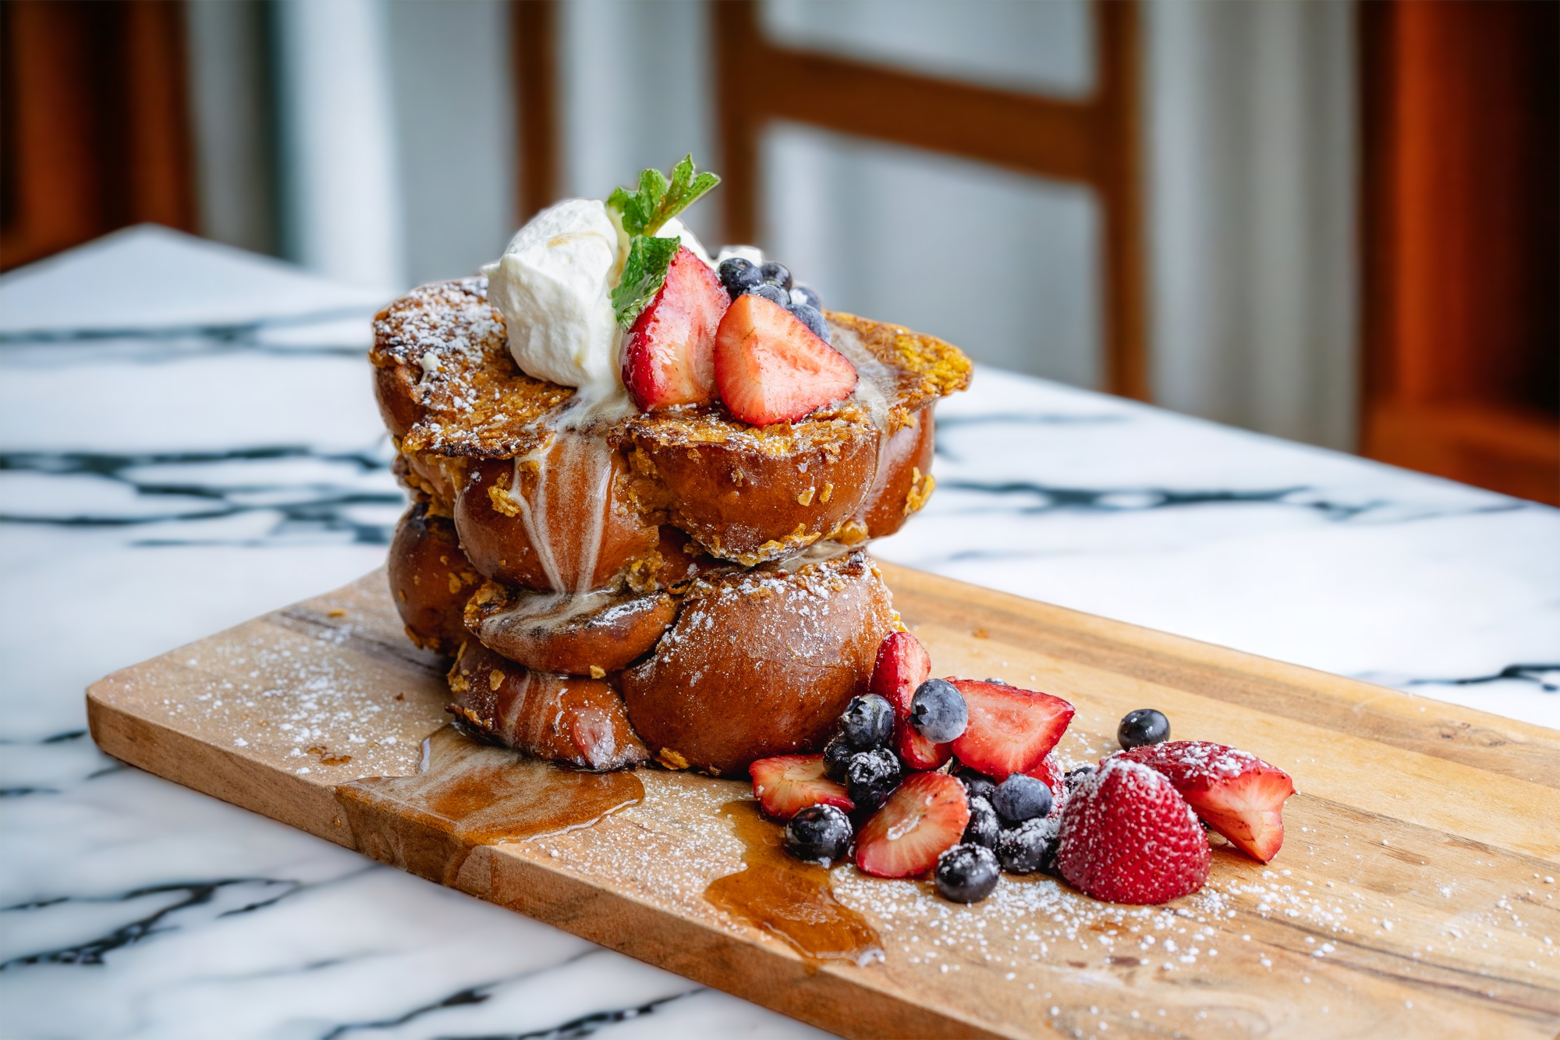 <h3>Best Brunch</h3>
<h4><a href="https://www.milknhoneycafe.com/" target="_blank" rel="noopener">Milk &amp; Honey</a></h4>
<p><em>Locations in D.C., Maryland and Virginia</em></p>
<p>Runner-up: <a href="https://www.makersunionpub.com/" target="_blank" rel="noopener noreferrer">Makers Union</a></p>
<p><a href="https://wtop.com/business-finance/2023/08/wtop-top-10-2023-best-brunch/" target="_blank" rel="noopener">See the TOP 10 places with the best brunch</a>.</p>
